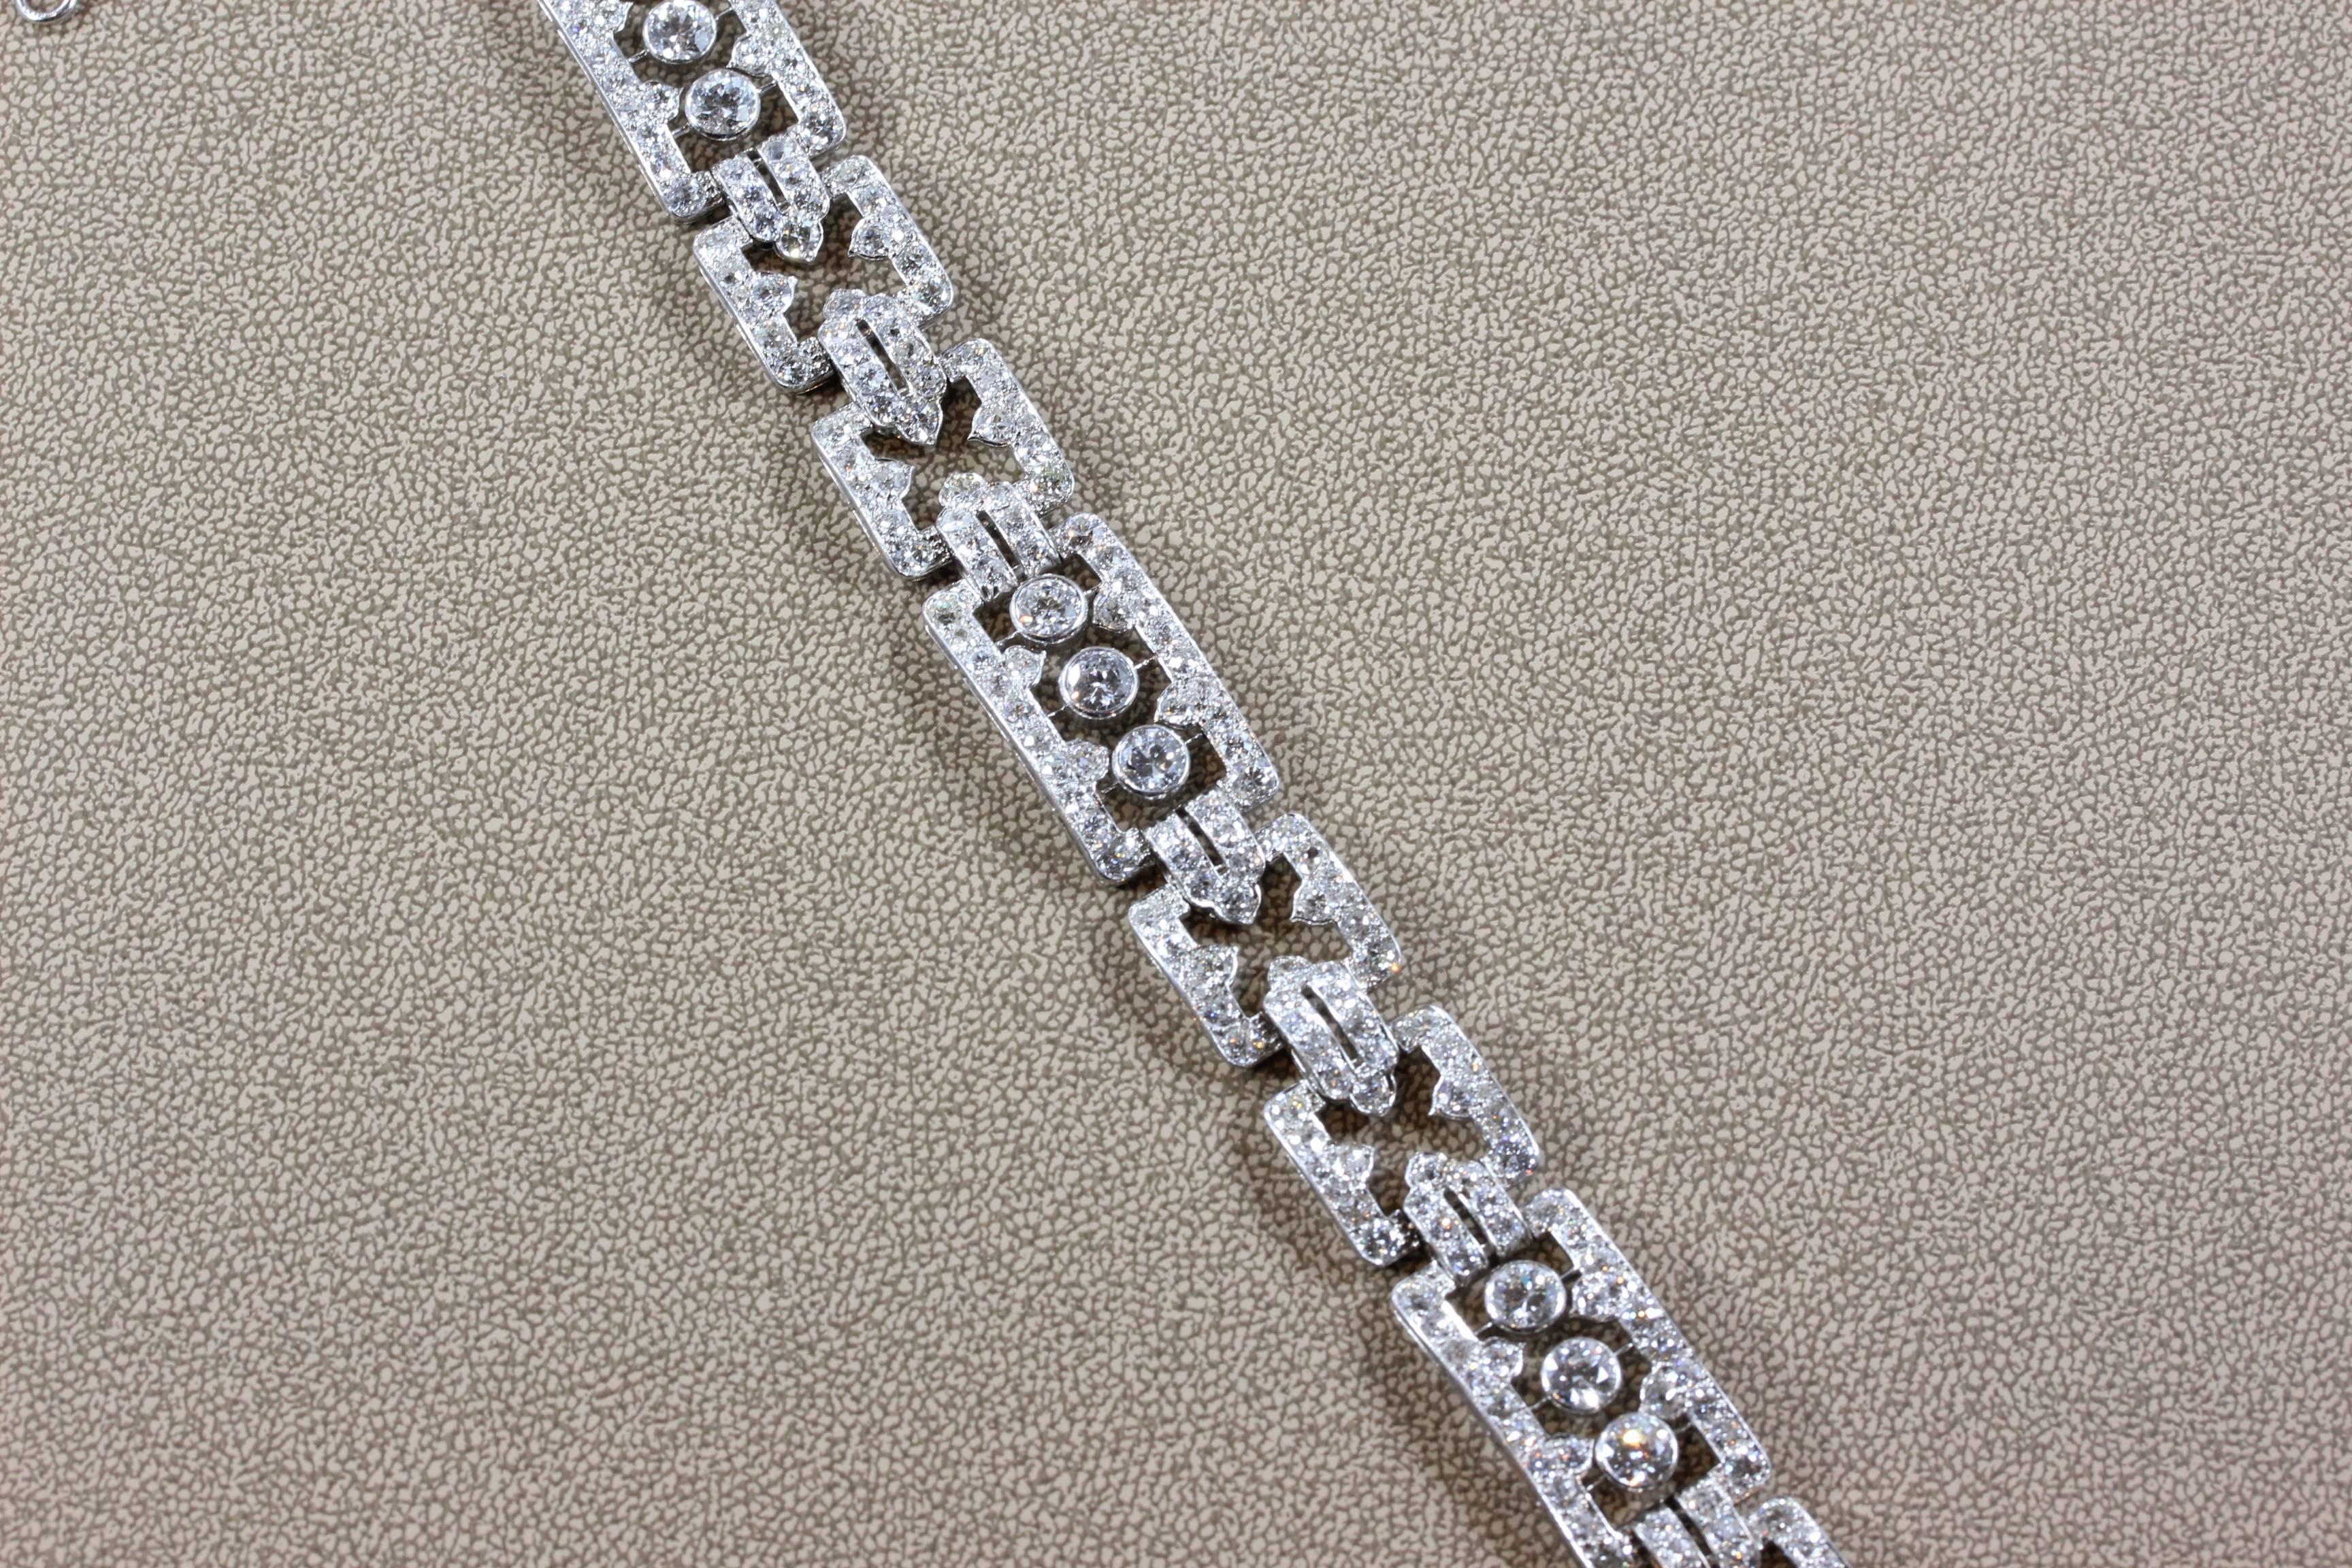 A classy diamond bracelet from the 1930’s, this art deco piece features approximately 17 carats of European cut round diamonds which are set in platinum. The diamonds are all VS quality and sparkle in the light just as they did when the piece was